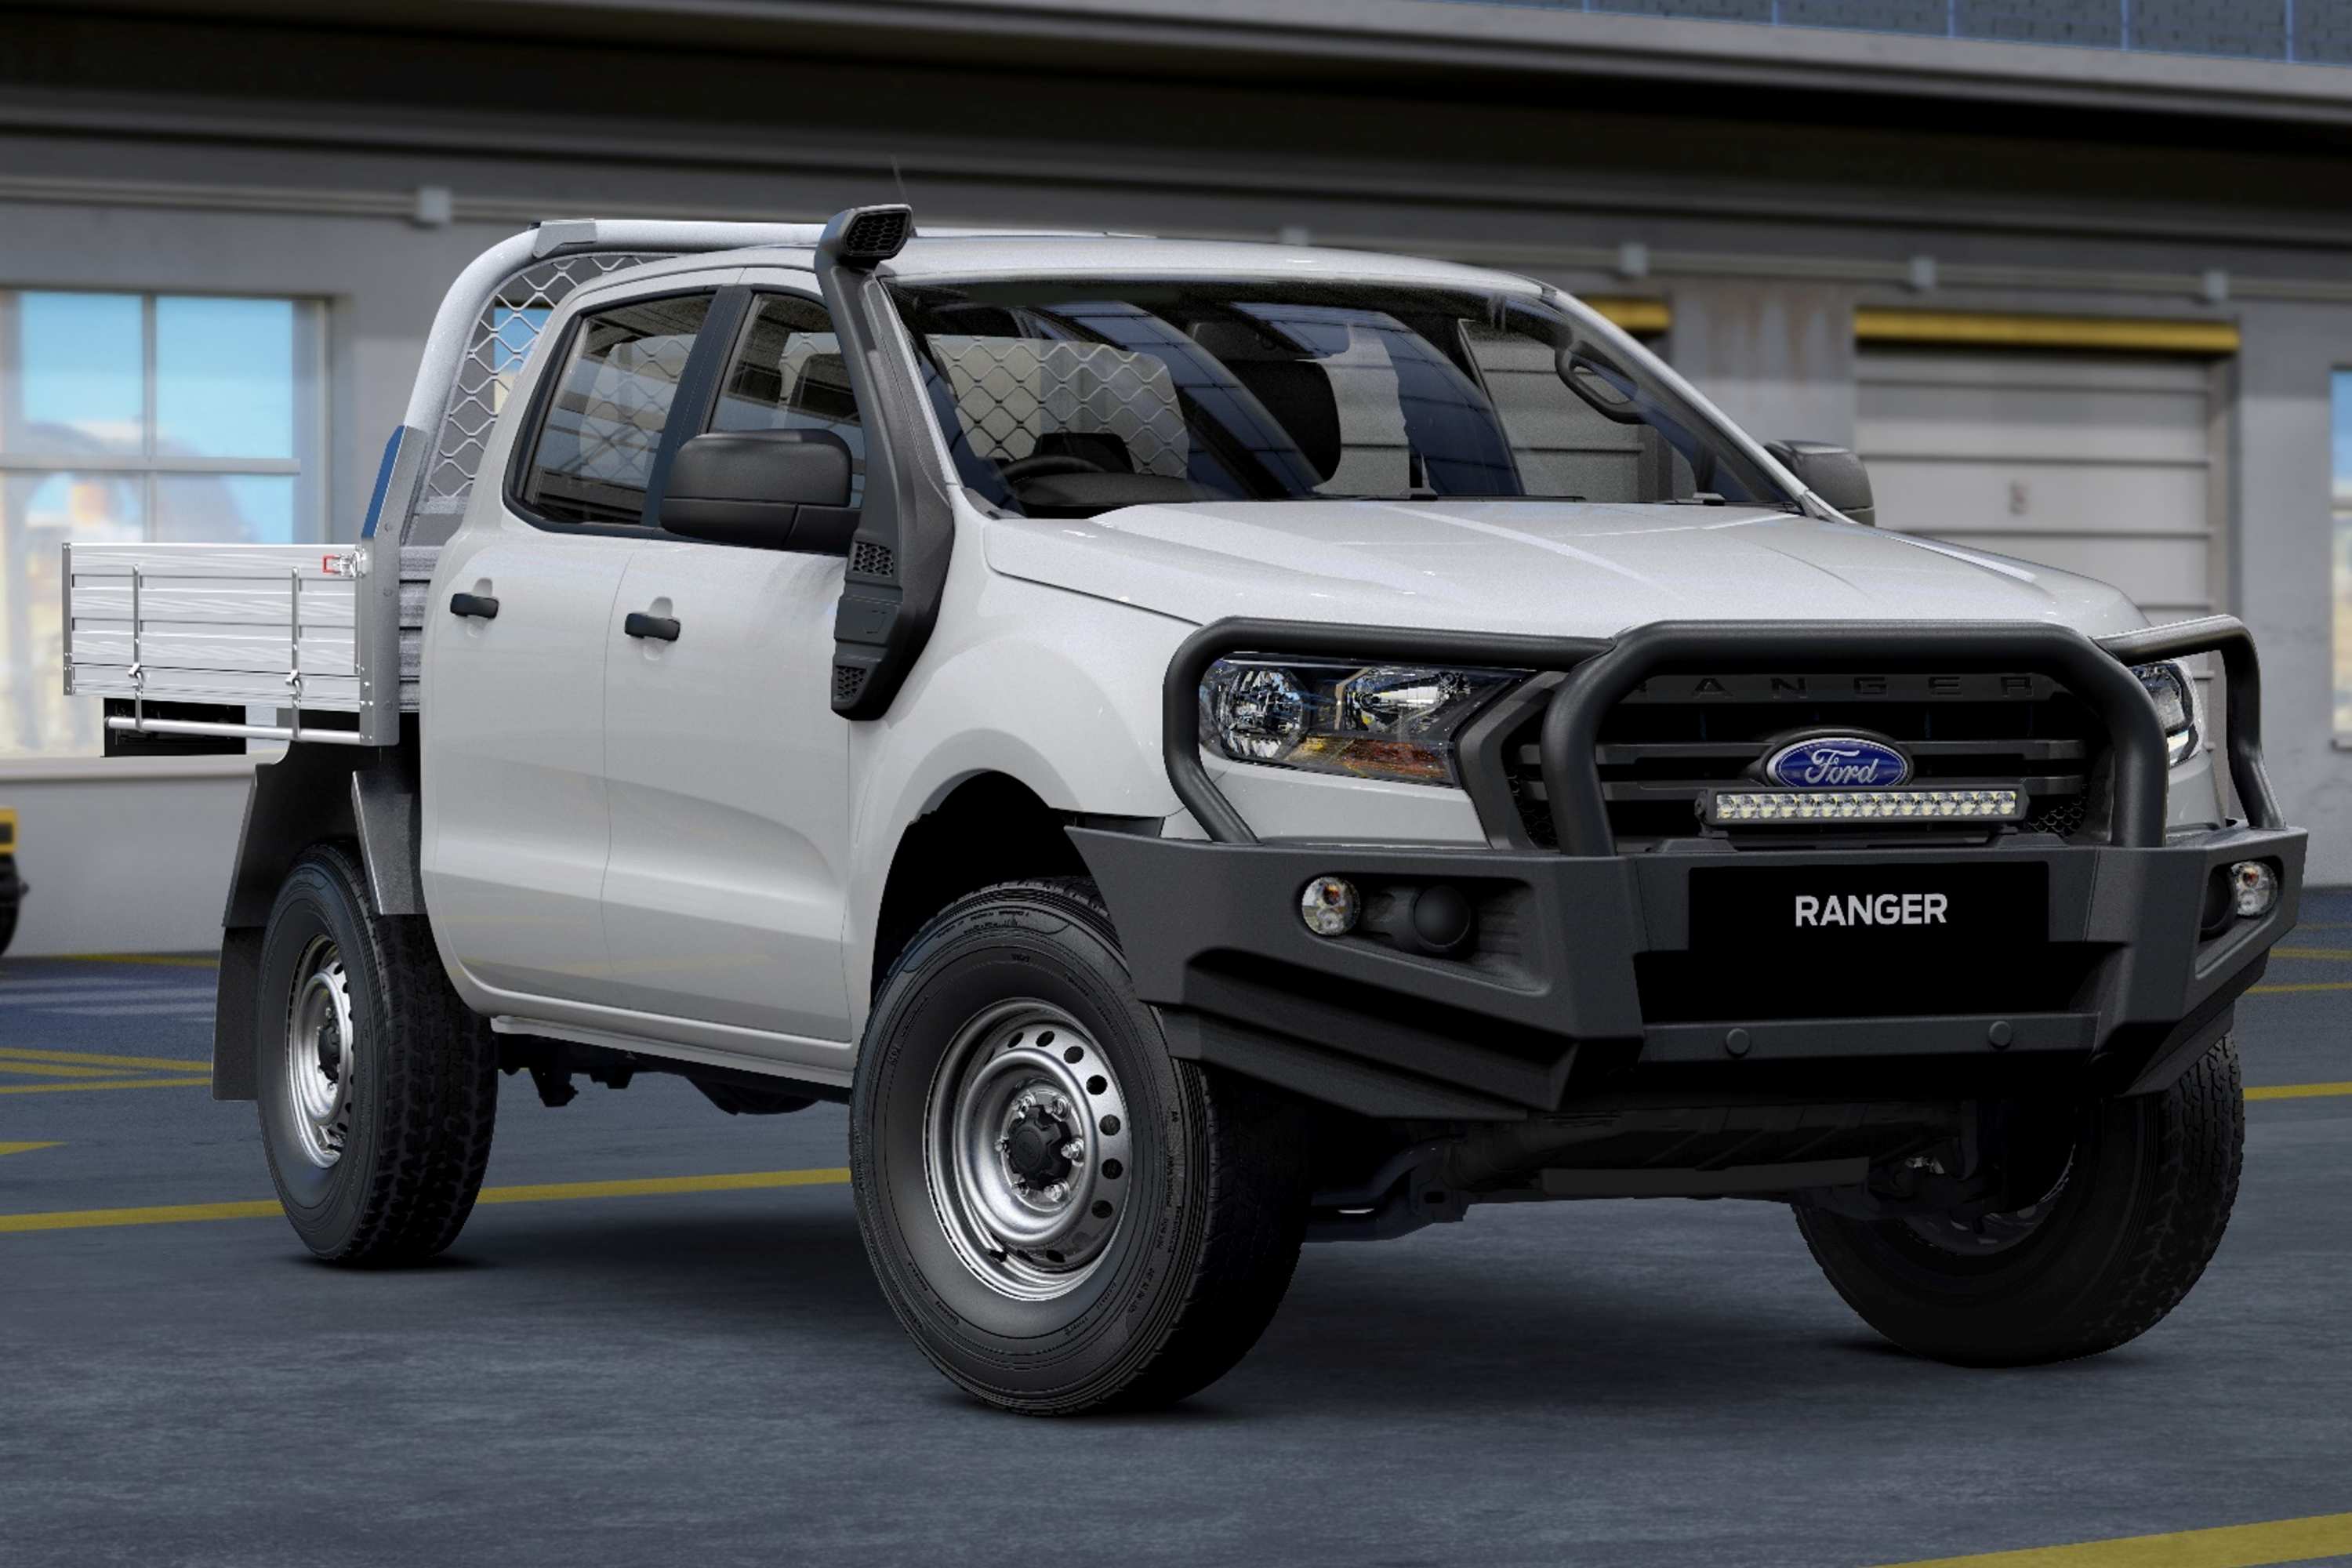 MY 2020 Ford Ranger XL 4x4 Special Edition front